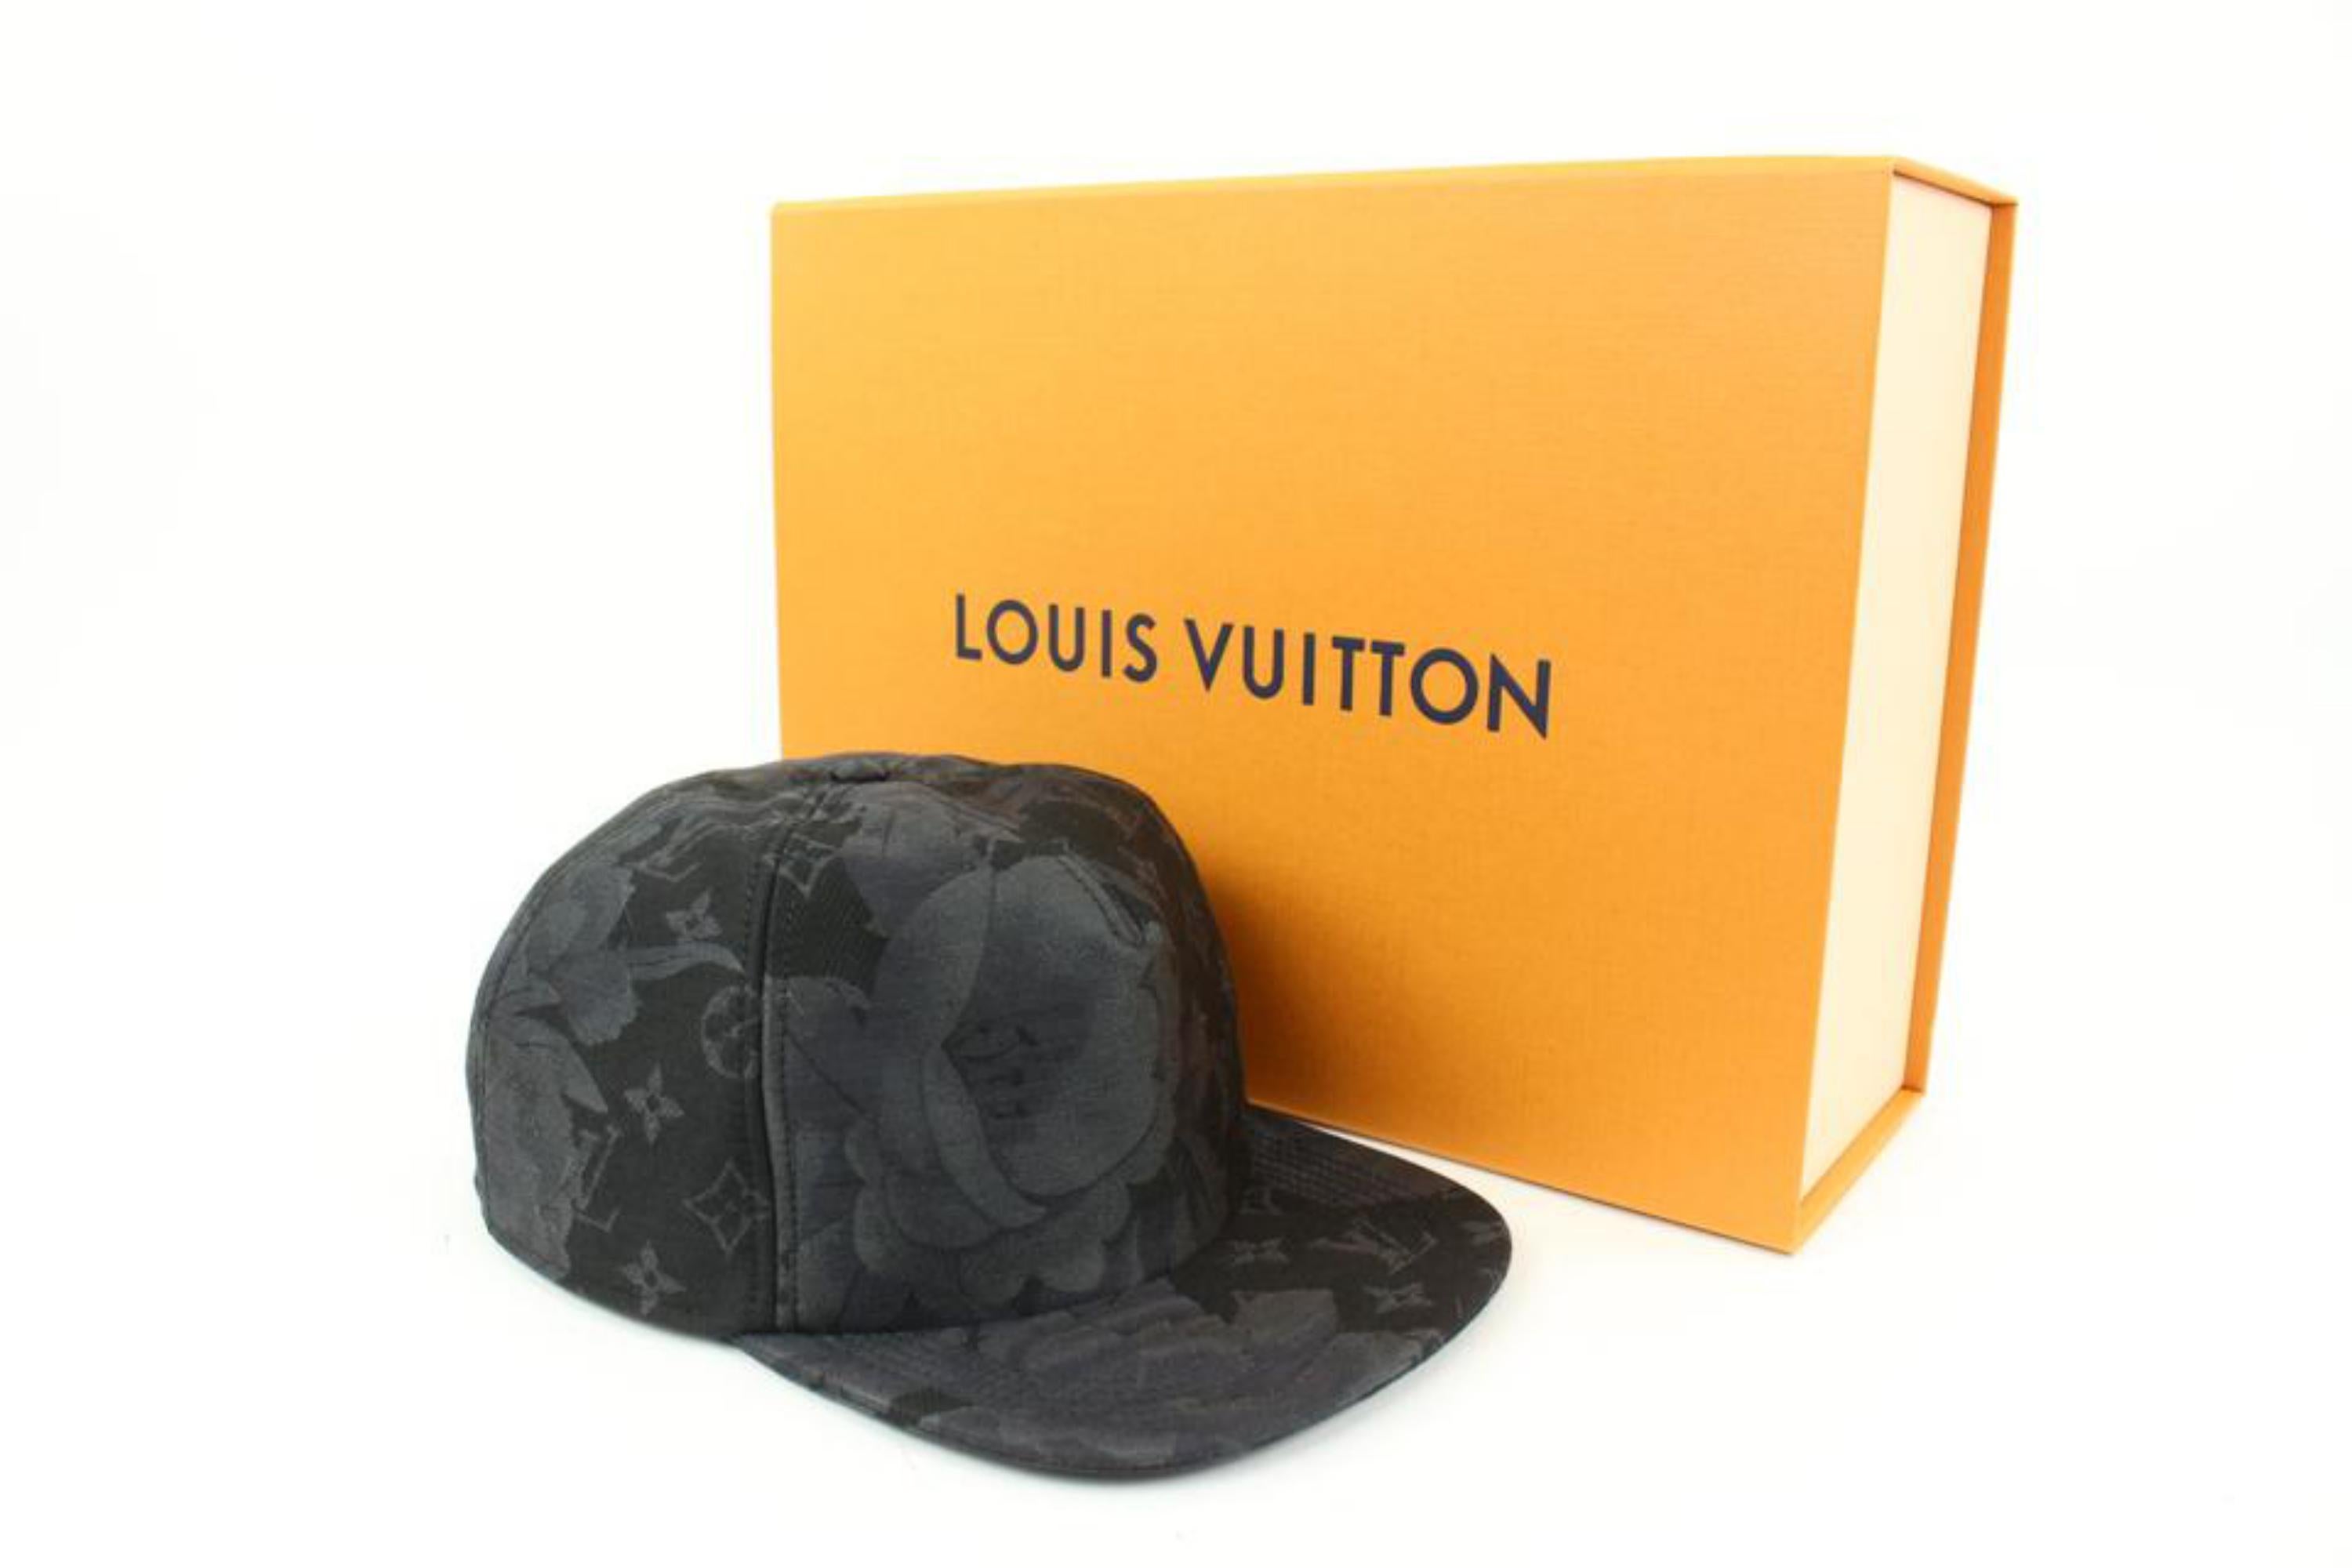 Louis Vuitton Size Large Virgil Abloh Black Flowers Baseball Cap 47lv128s
Date Code/Serial Number: NX1221 MP3293
Made In: Italy
Measurements: Length:  8